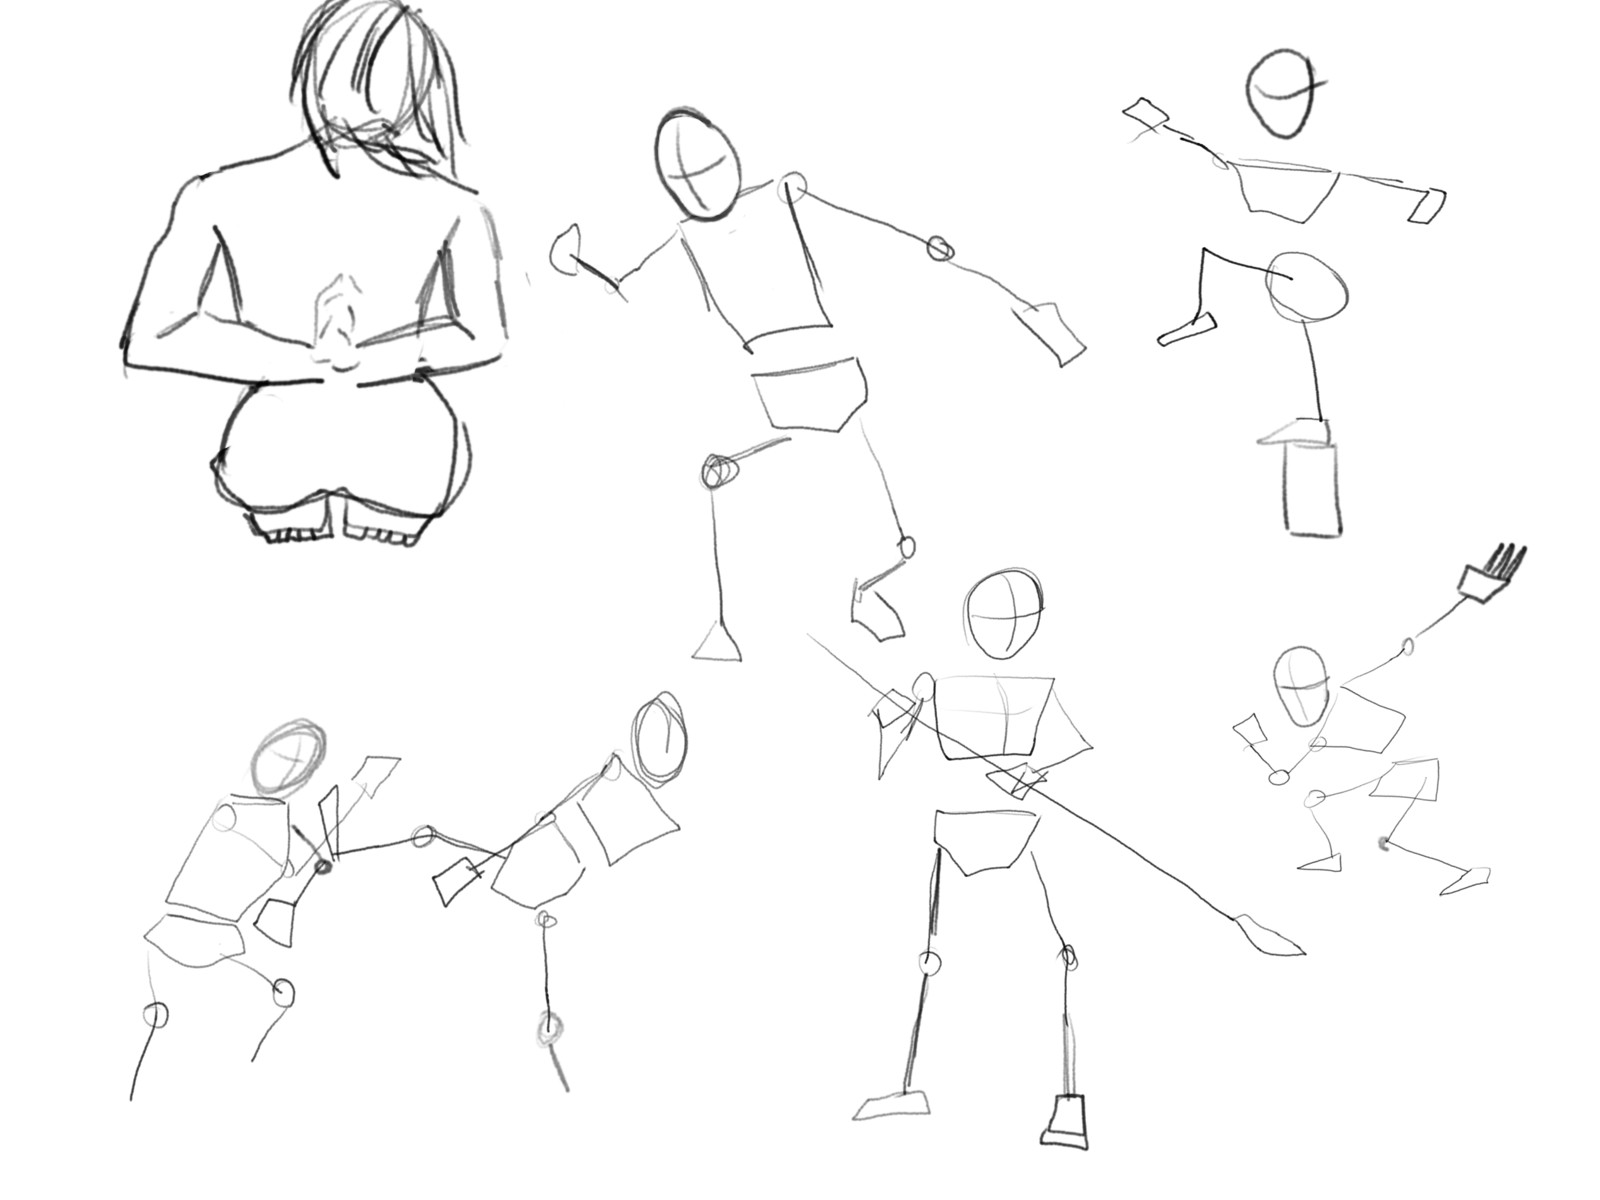 Pin by Pixie on Pose reference | Drawing reference poses, Pose reference,  Figure drawing reference